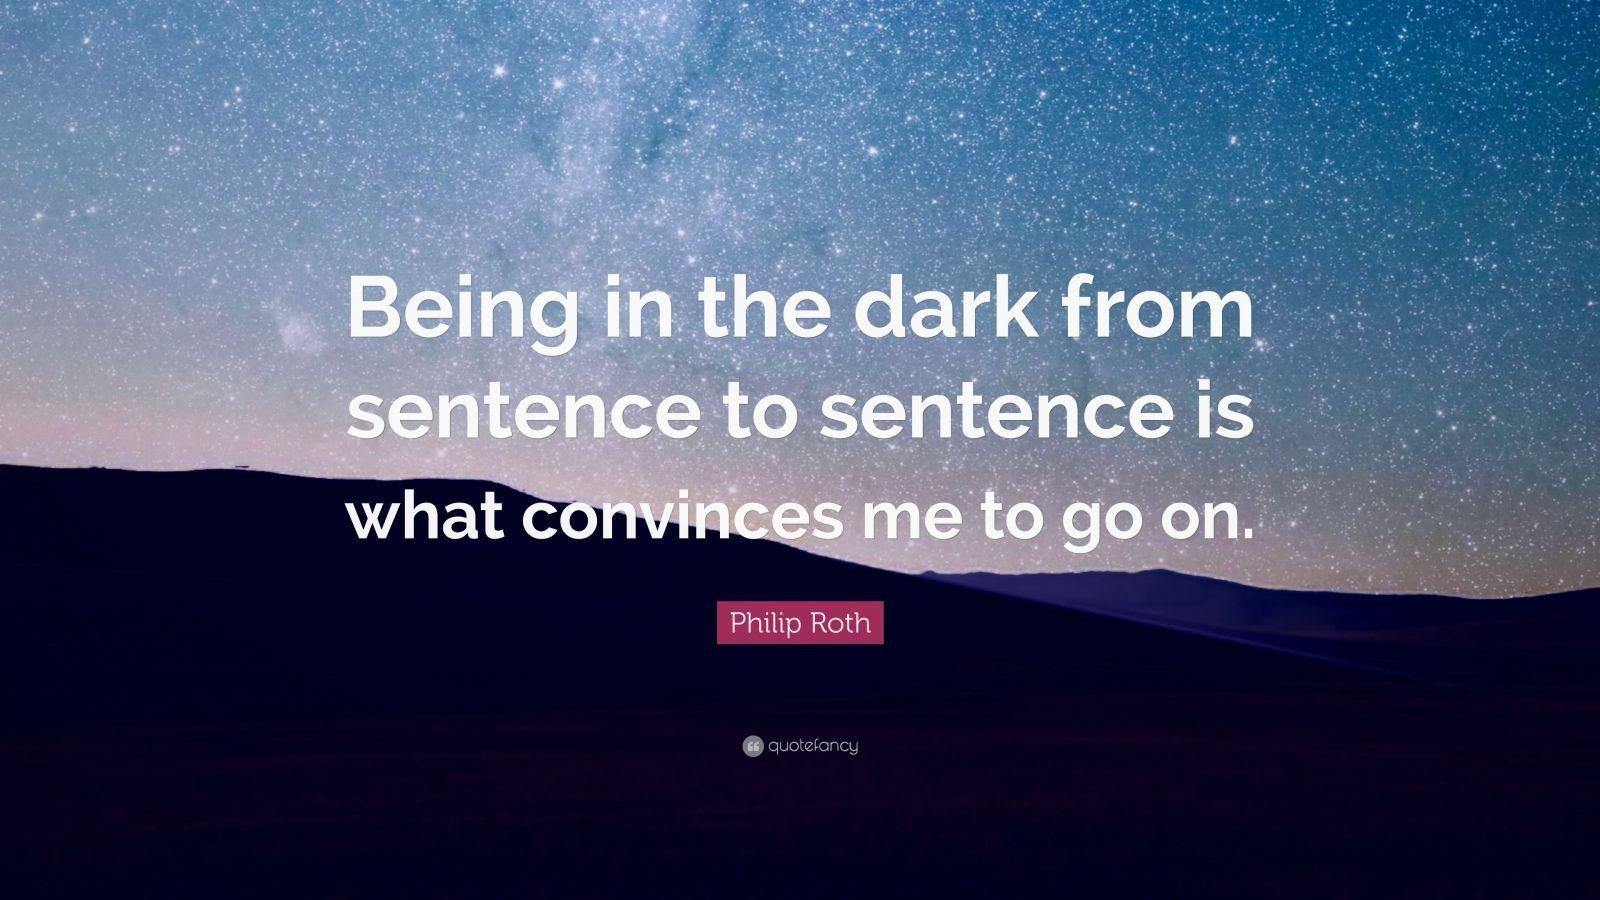 Philip Roth Quote: “Being in the dark from sentence to sentence is